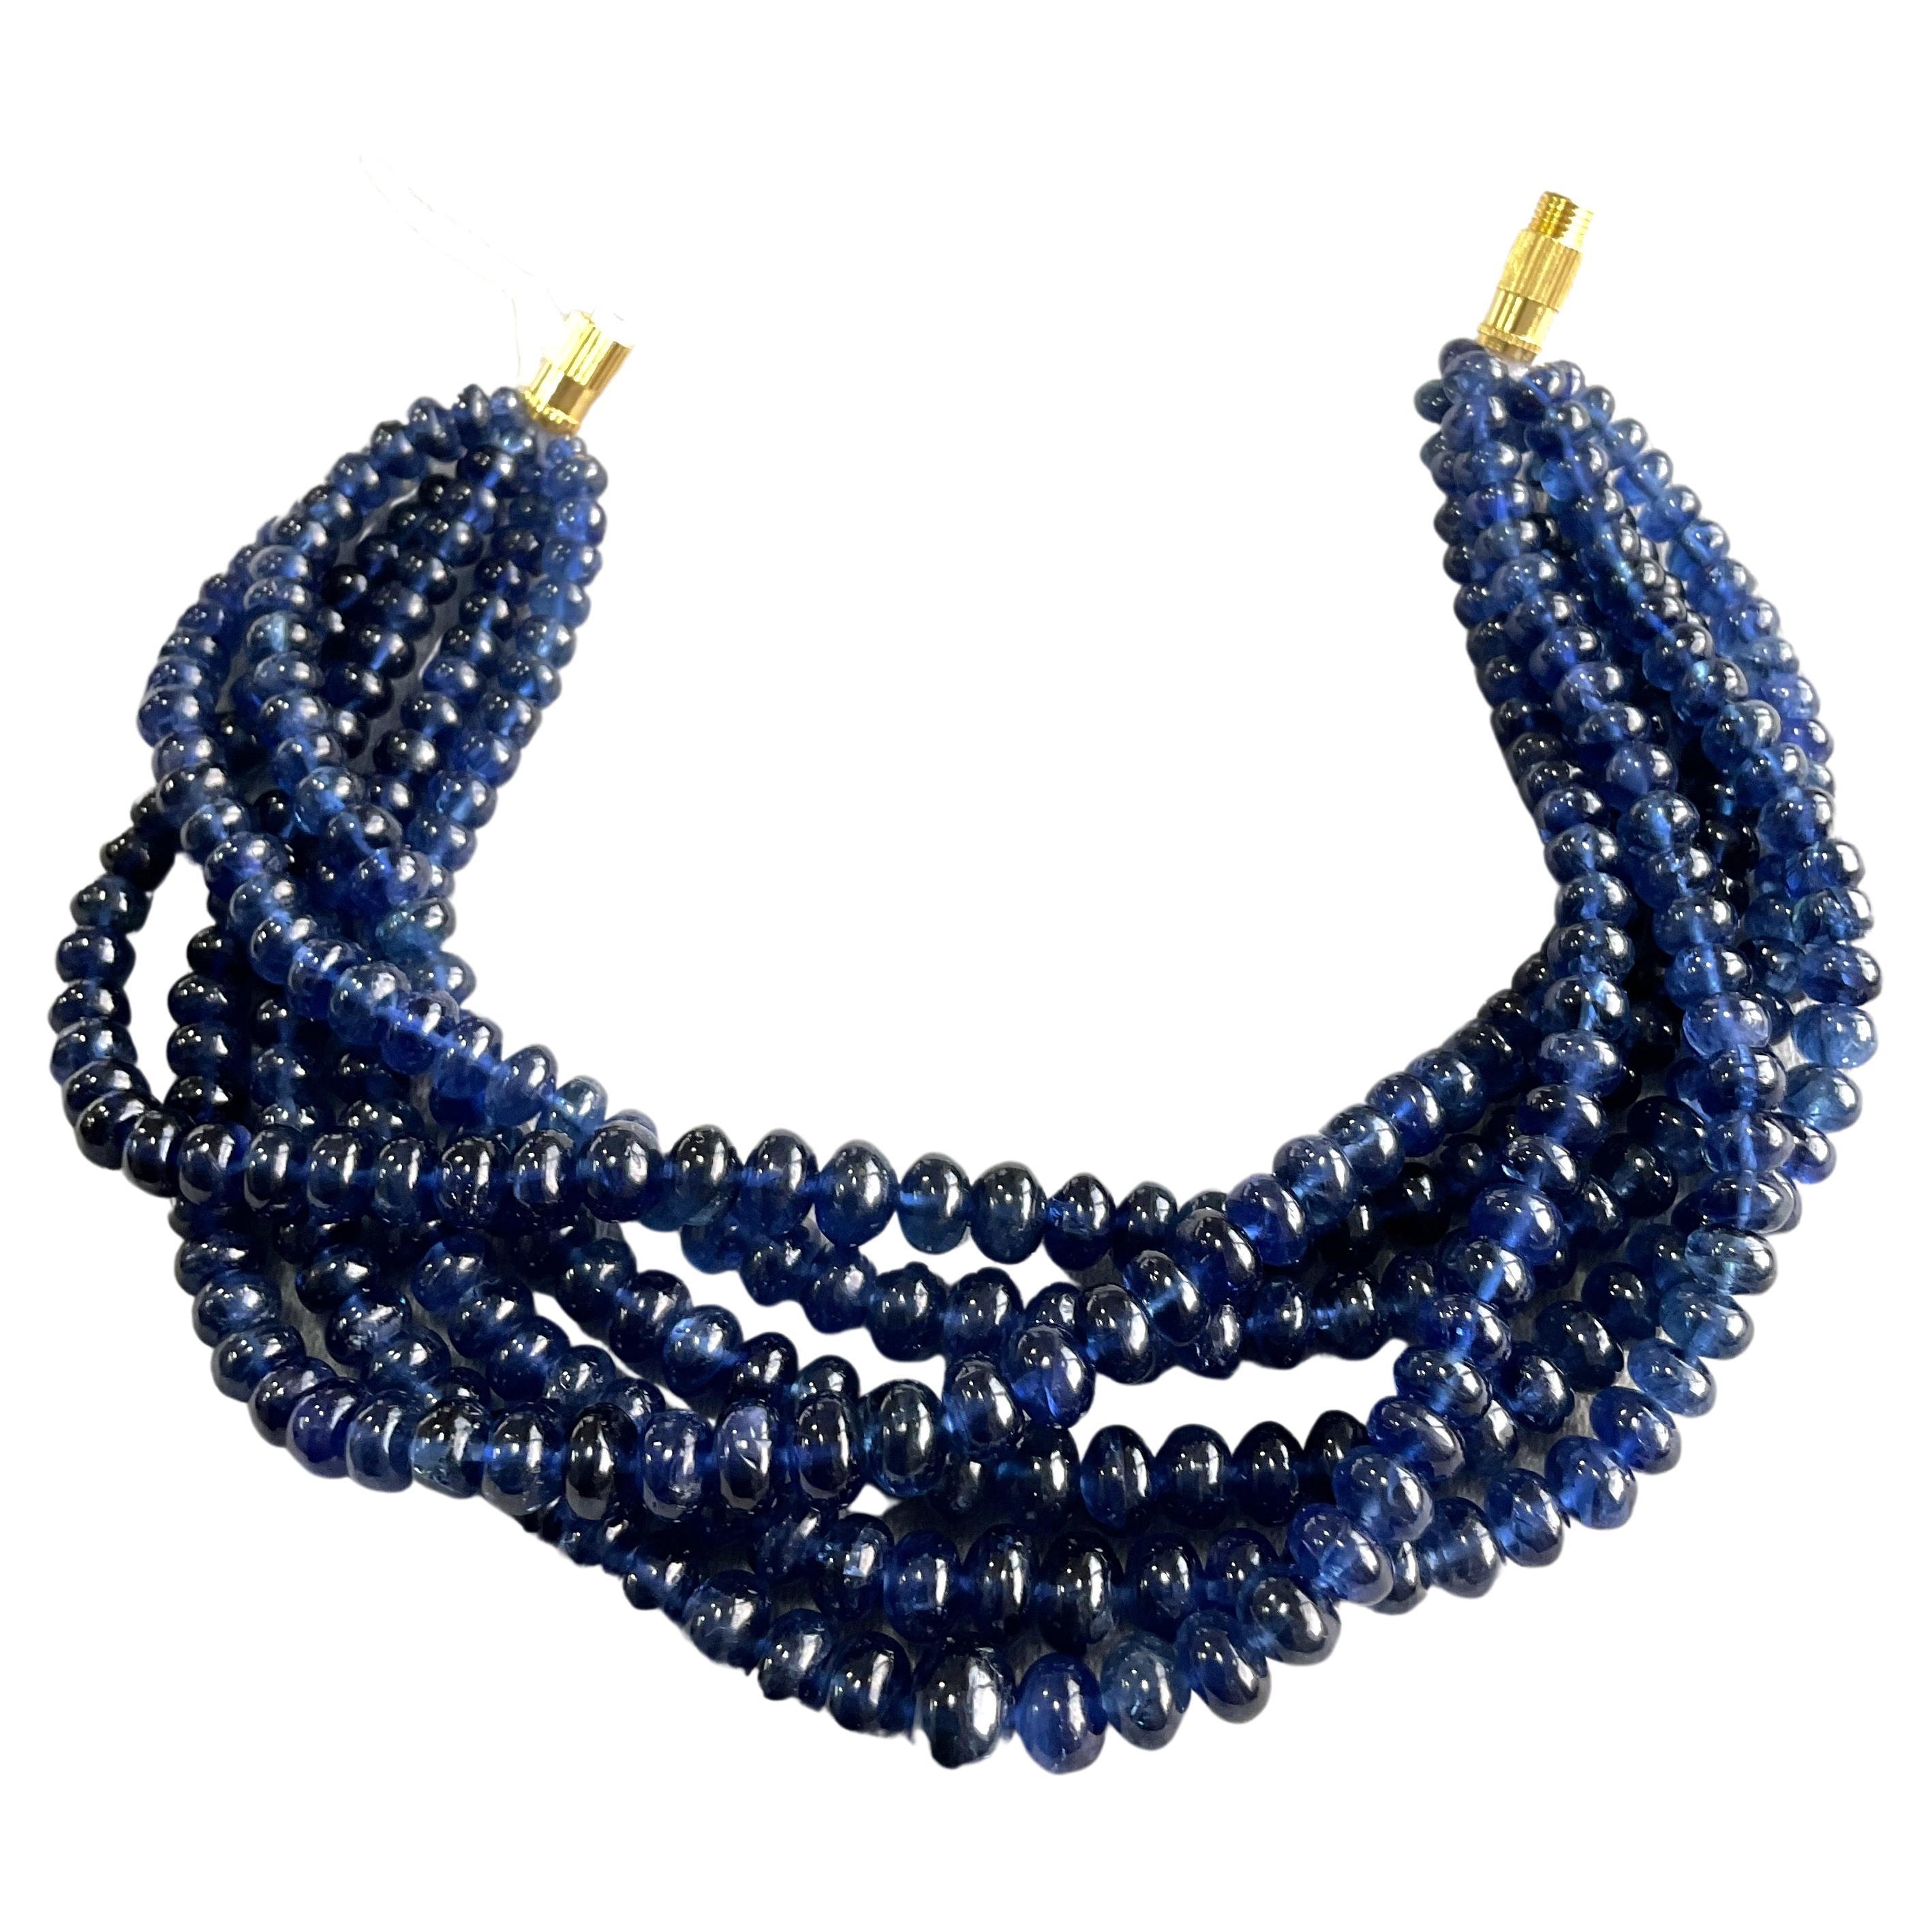 Brilliant-Cut Created Blue Sapphire and Bead Necklace in Sterling Silver